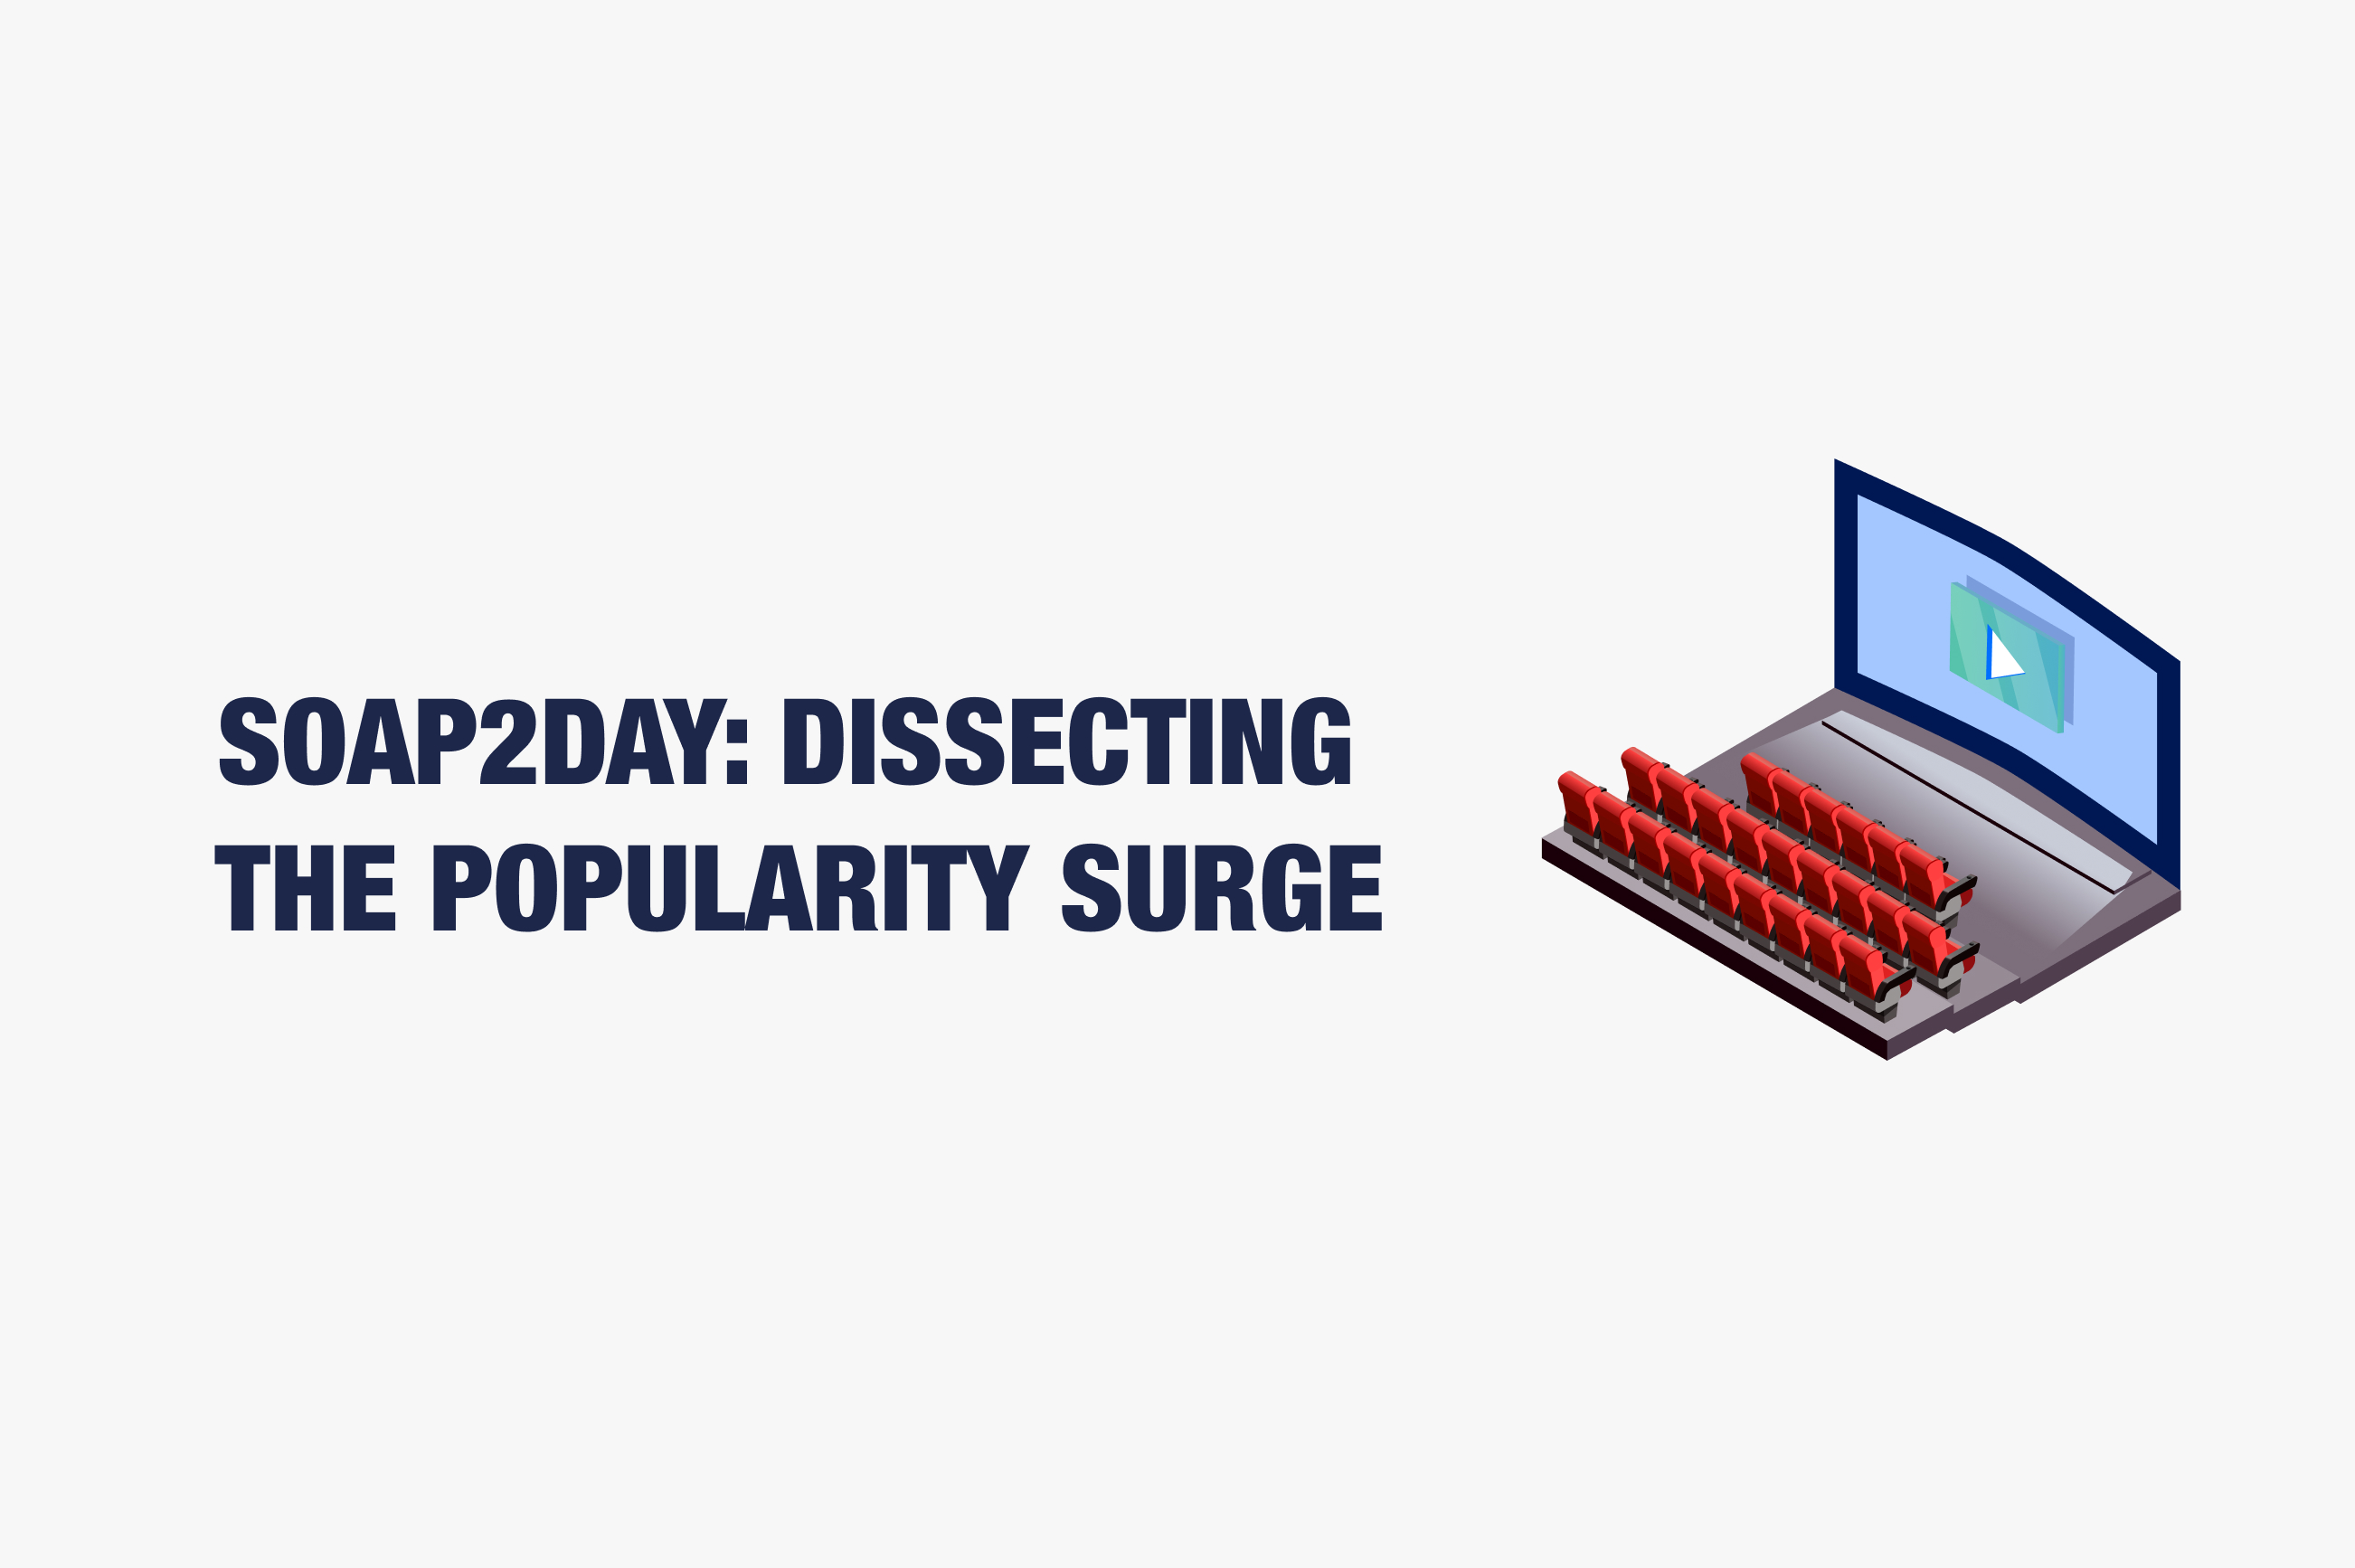 Soap2day: Dissecting the Popularity Surge